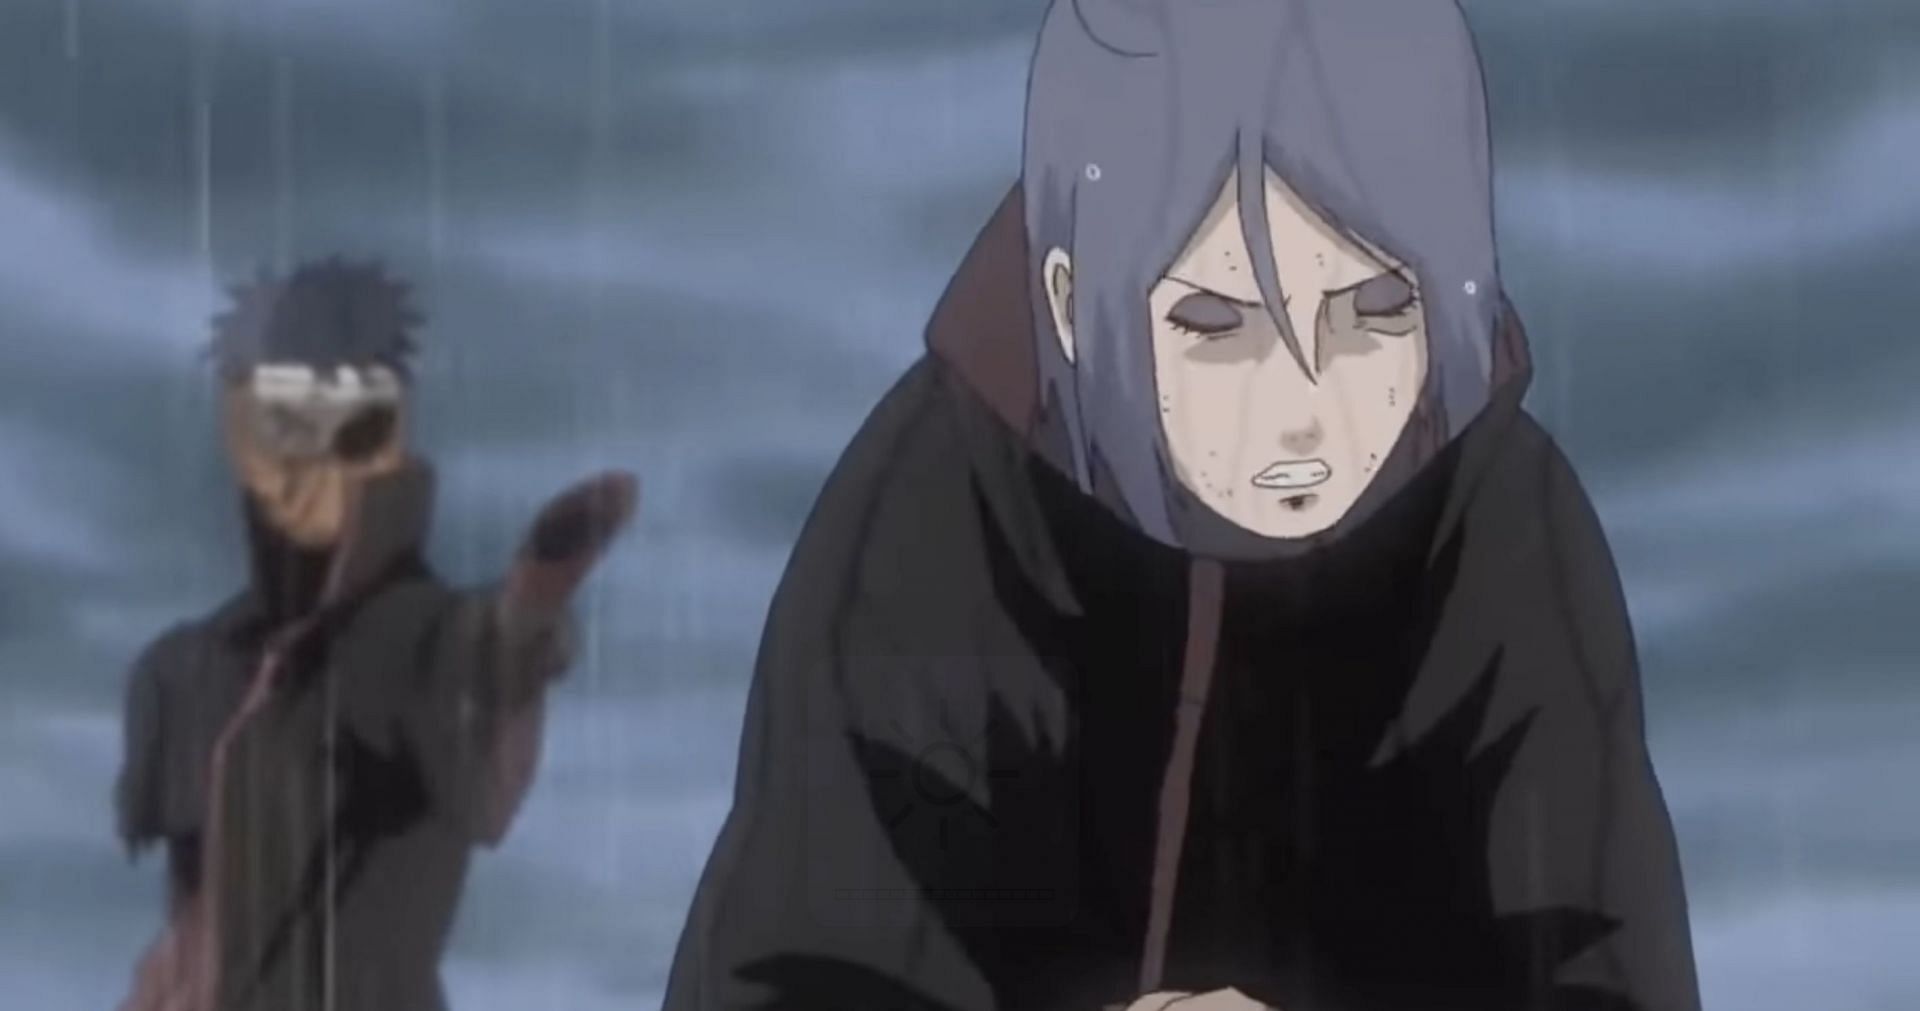 5 Naruto characters who can beat Minato (& 5 who never will)